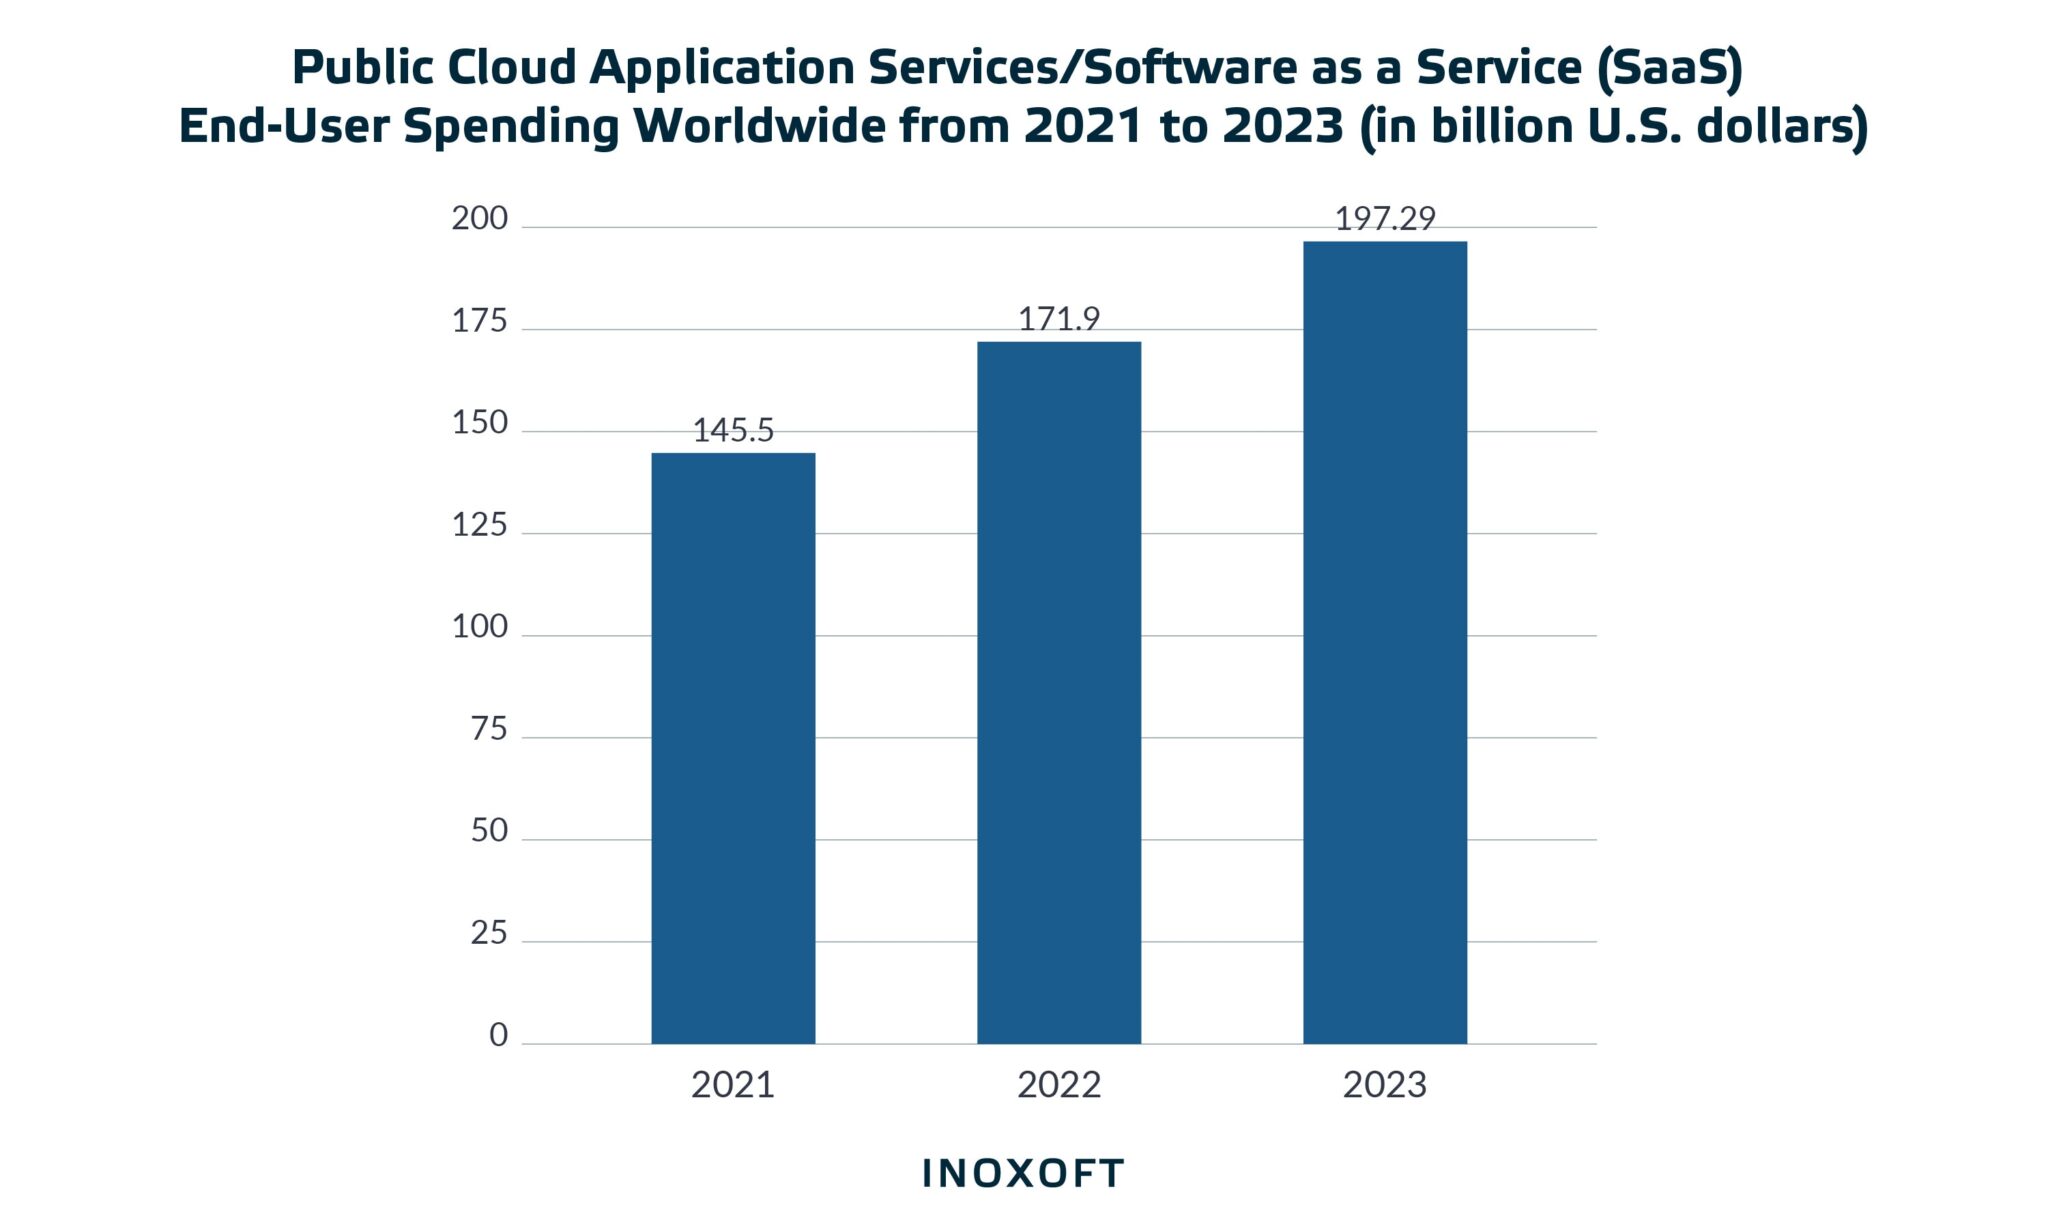 Bar chart of public cloud application services/software as a service (SaaS) end-user spending worldwide from 2021 to 2023 (in billion U.S. dollars)